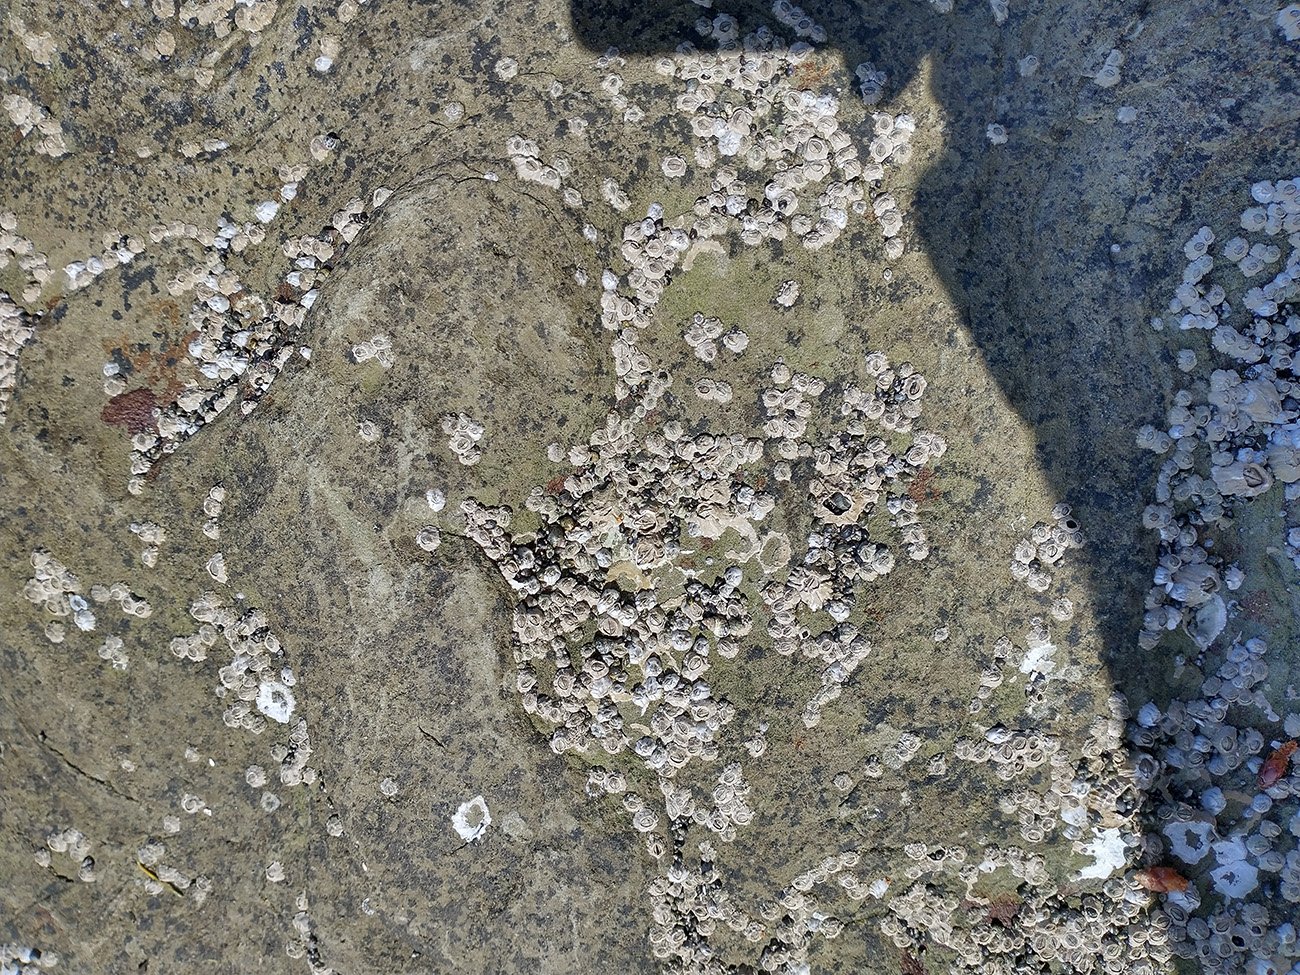 Millions of these barnacles on every rock. 